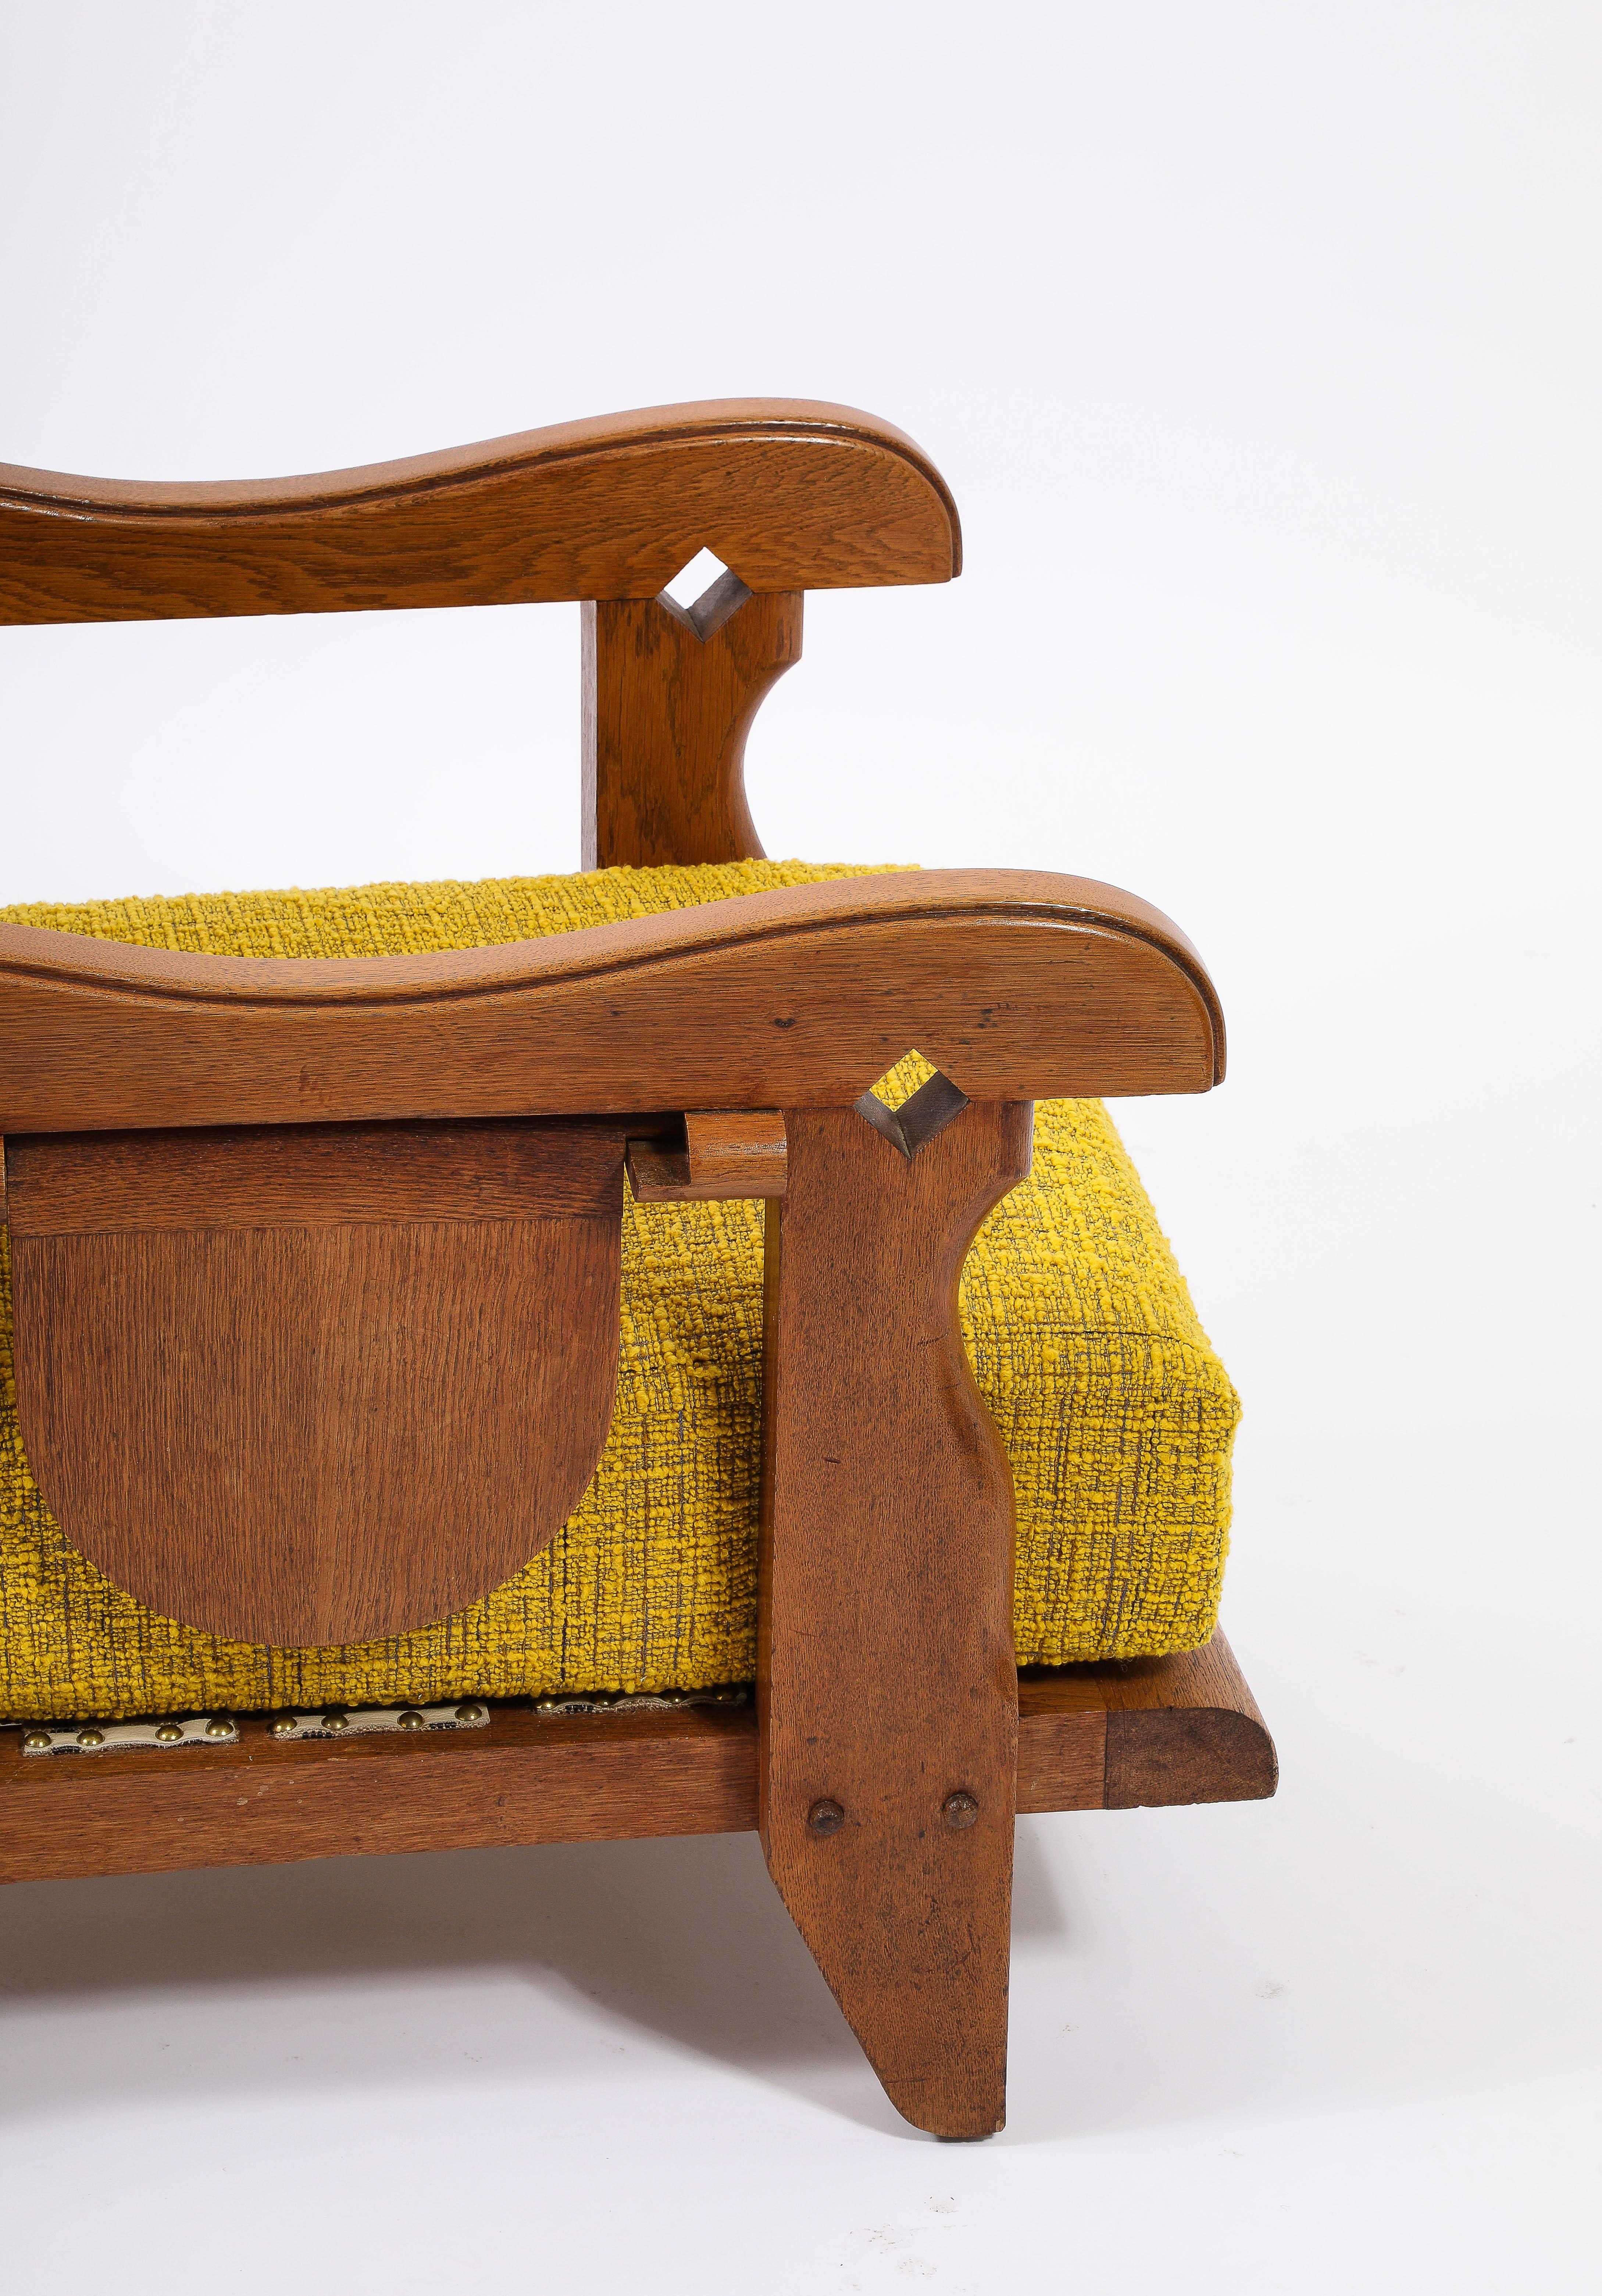 Hand-Carved Large Oak & Yellow Wool Armchair with side Shelf, France 1950's For Sale